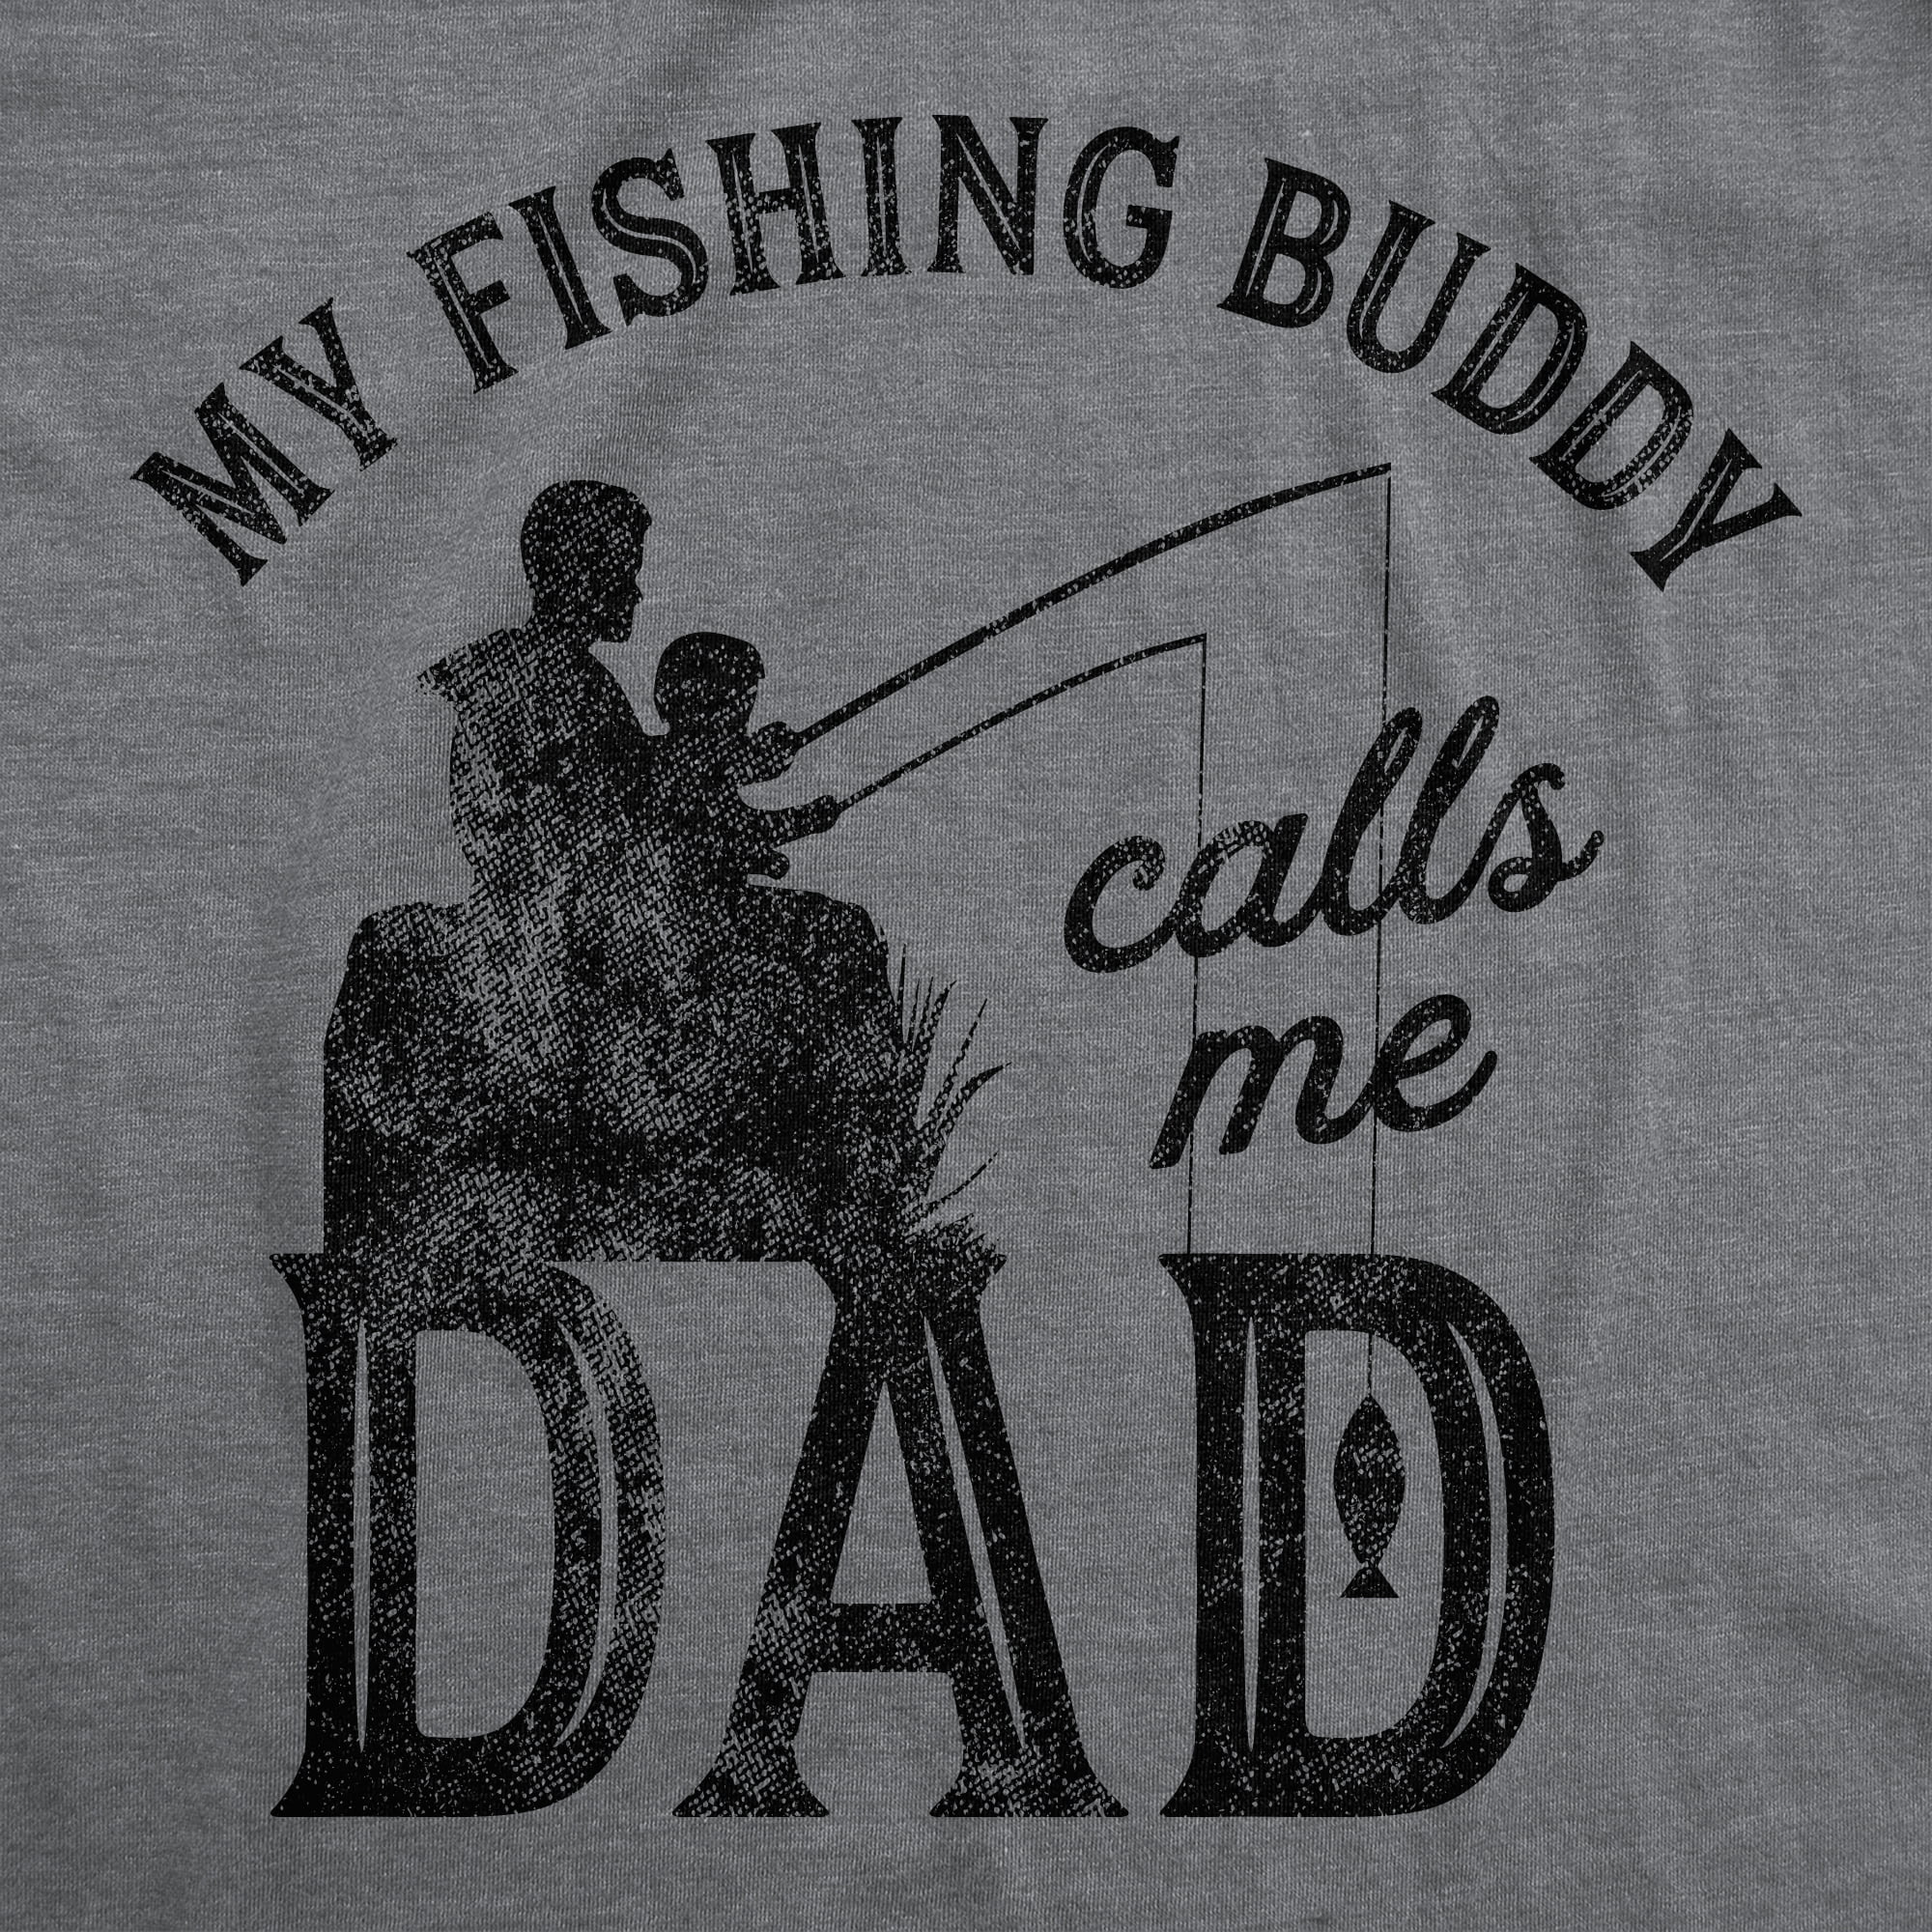 Mens My Fishing Buddy Calls Me Dad Tshirt Funny Fathers Day Graphic Novelty  Tee Graphic Tees 